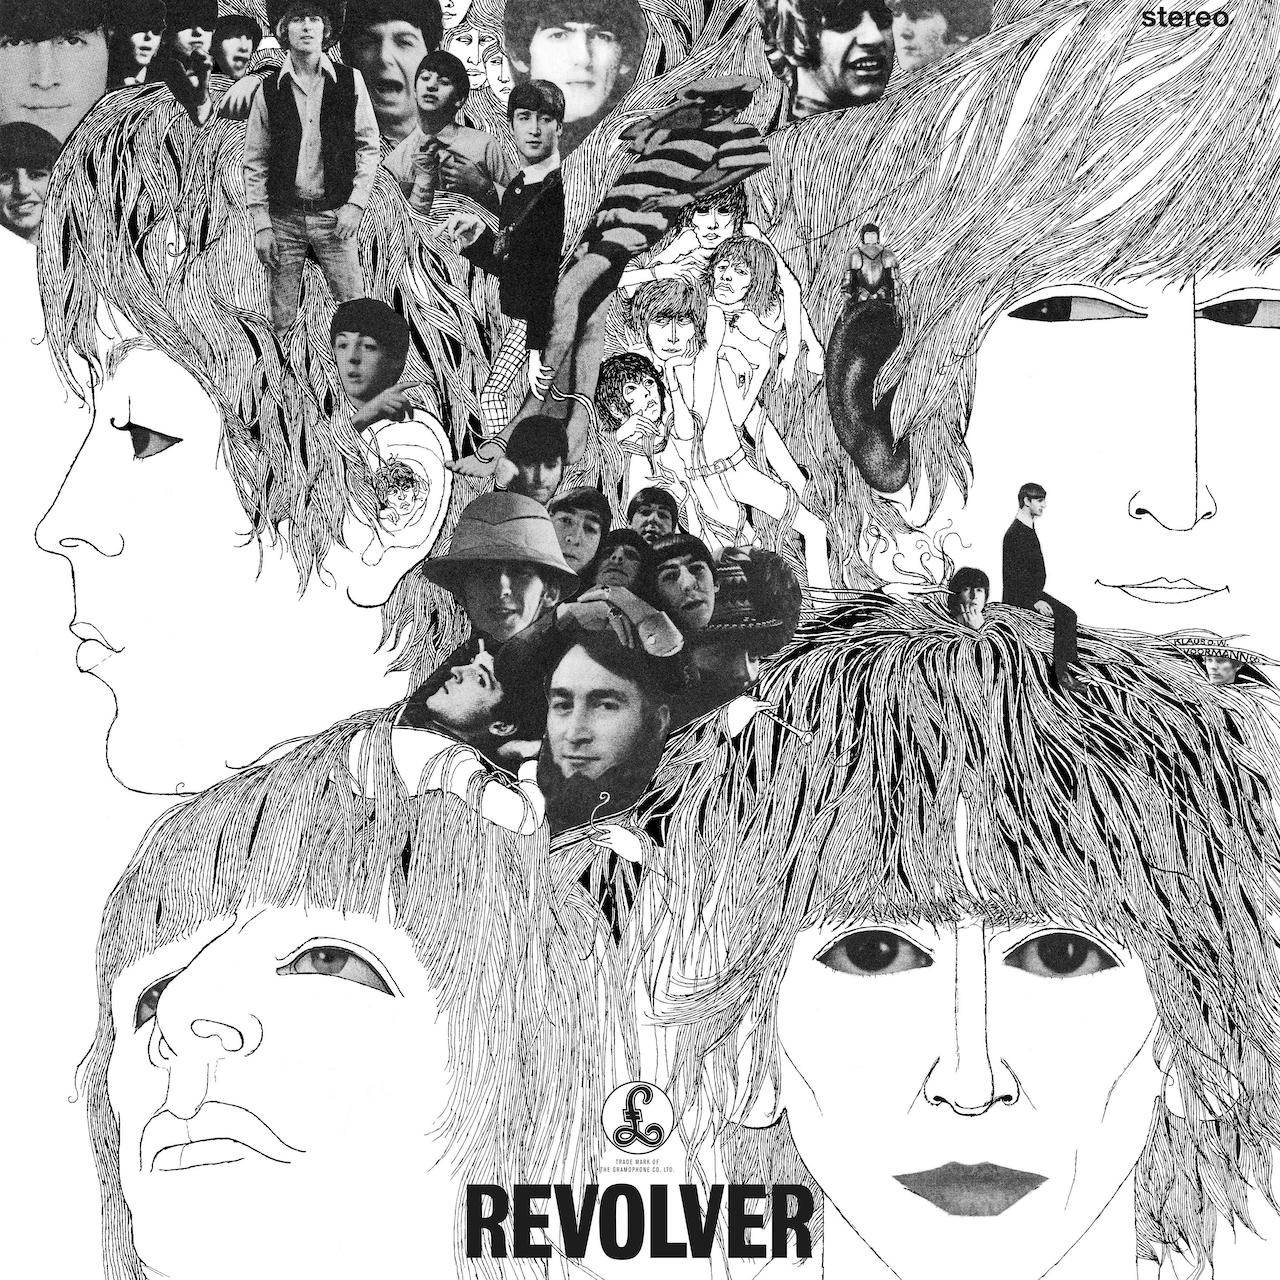 The Beatles revolver special edition reissue